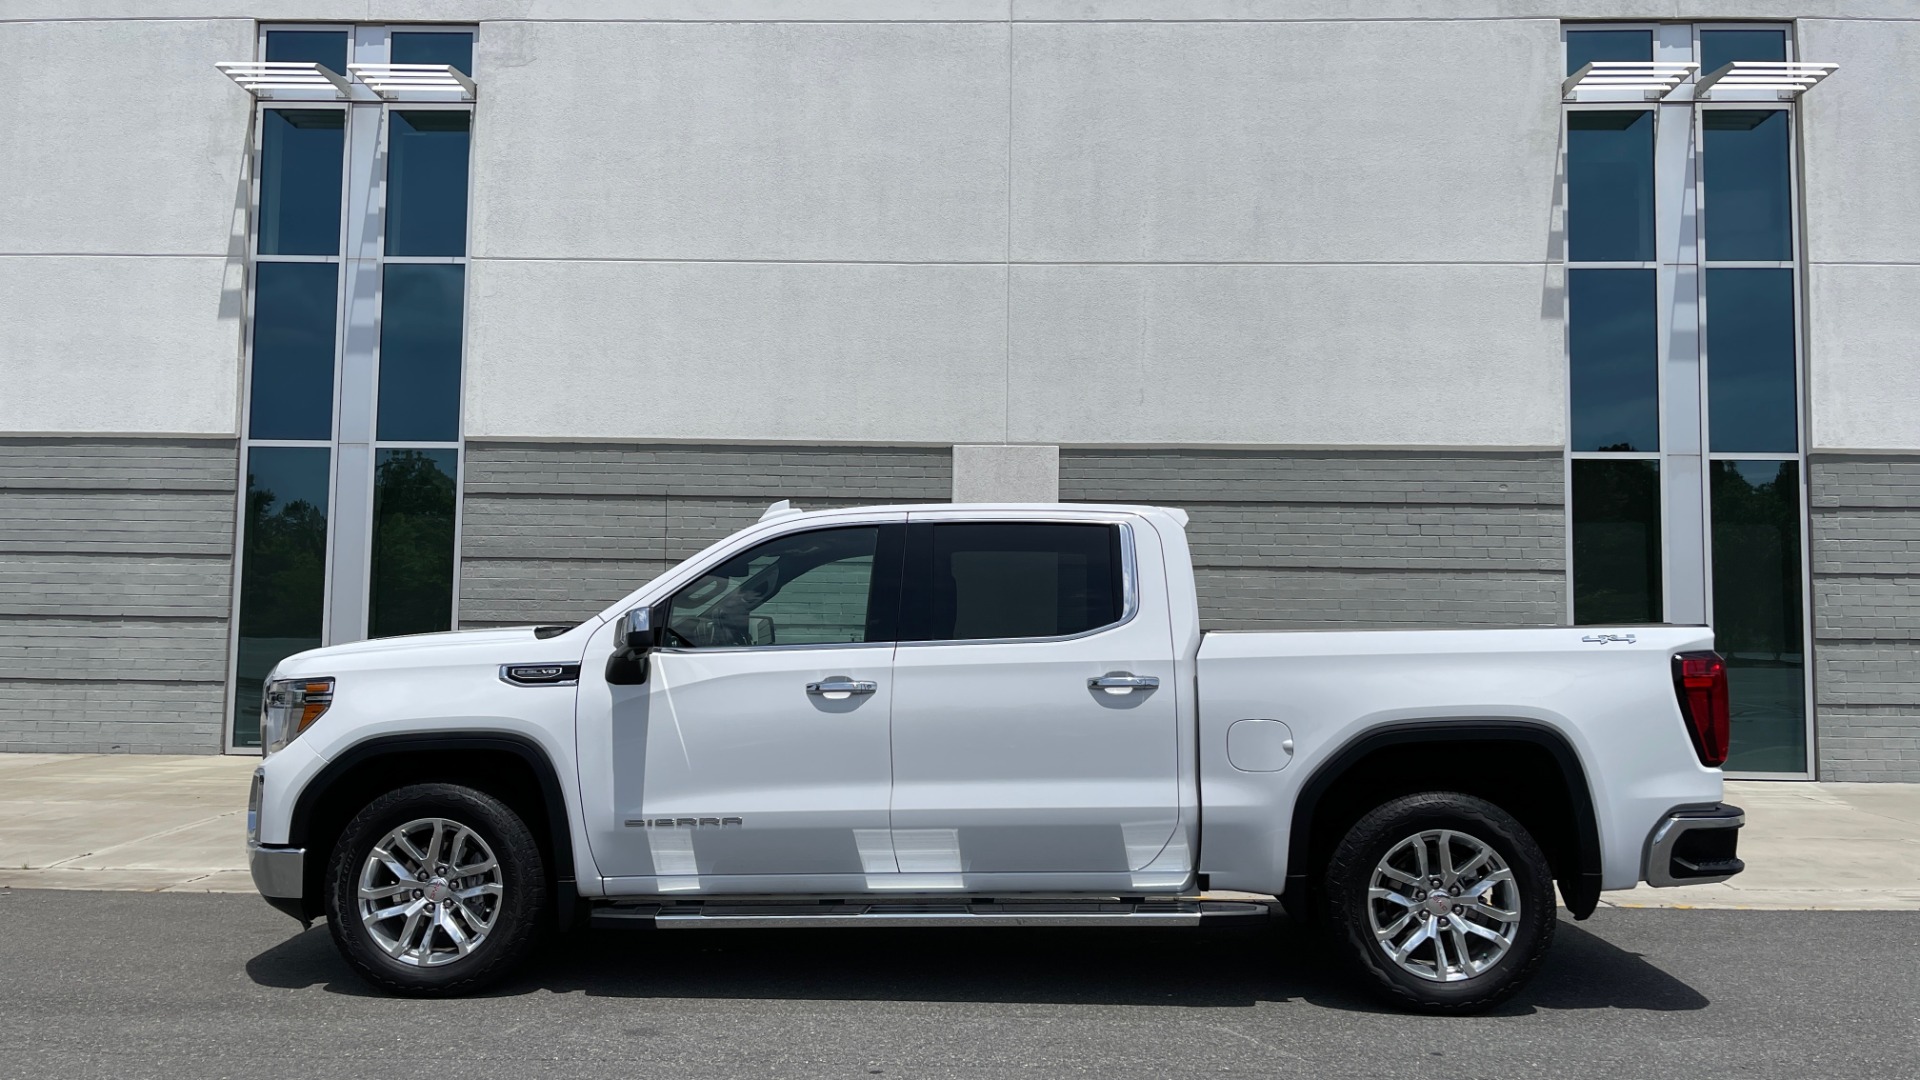 Used 2019 GMC SIERRA 1500 SLT 4X4 CREWCAB / 5.3L V8 / 8-SPD AUTO / NAV / BOSE / REARVIEW for sale Sold at Formula Imports in Charlotte NC 28227 4